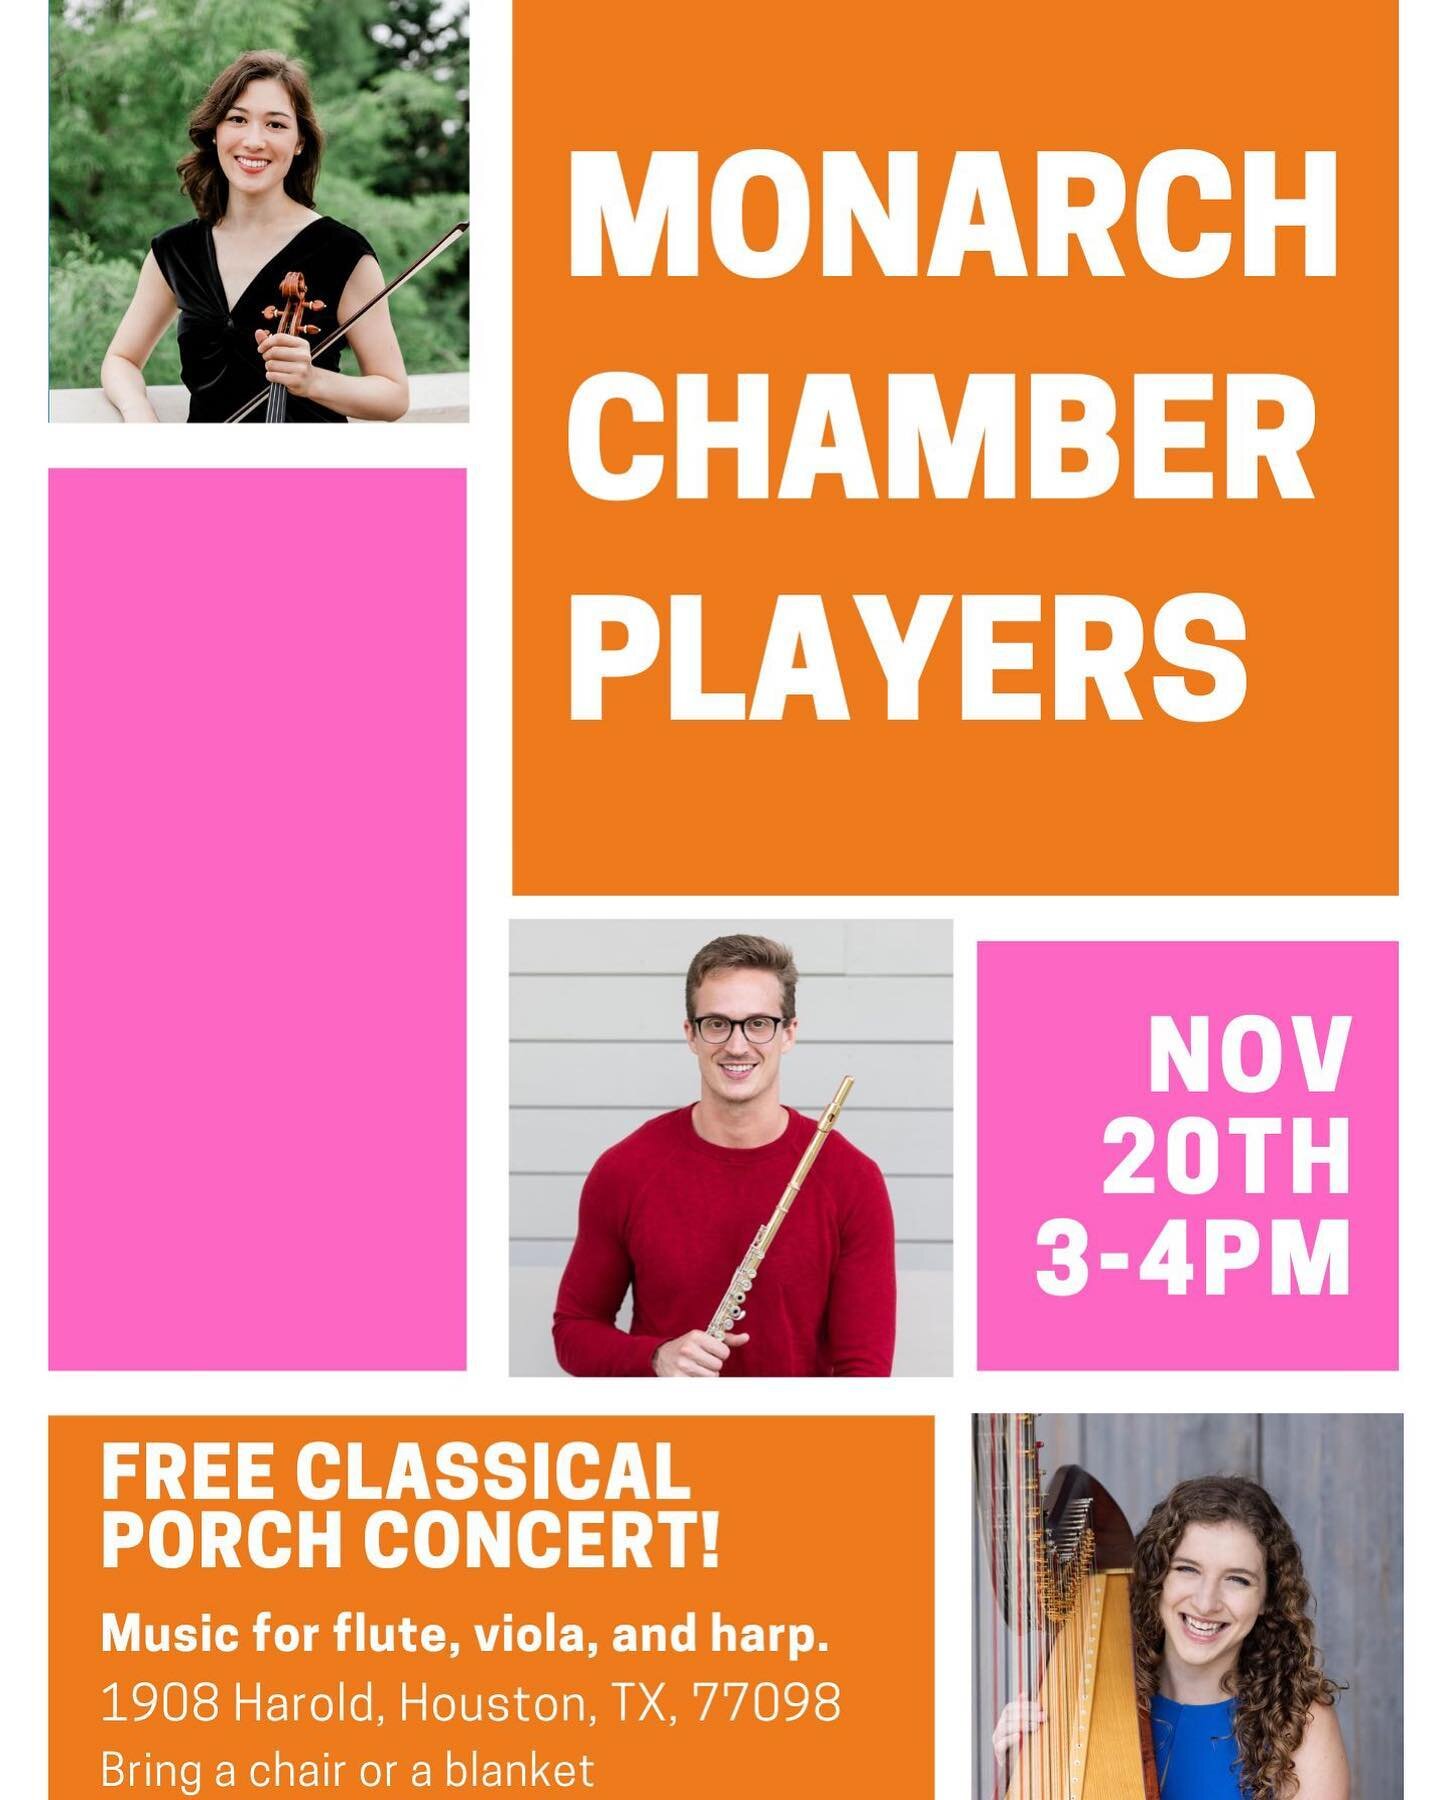 Happening this SUNDAY from 3-4PM! Come enjoy beautiful tunes for flute, viola, and harp at 1908 Harold St. Bring a chair or blanket to sit on. Admission is free! Don&rsquo;t miss this dreamy ensemble!